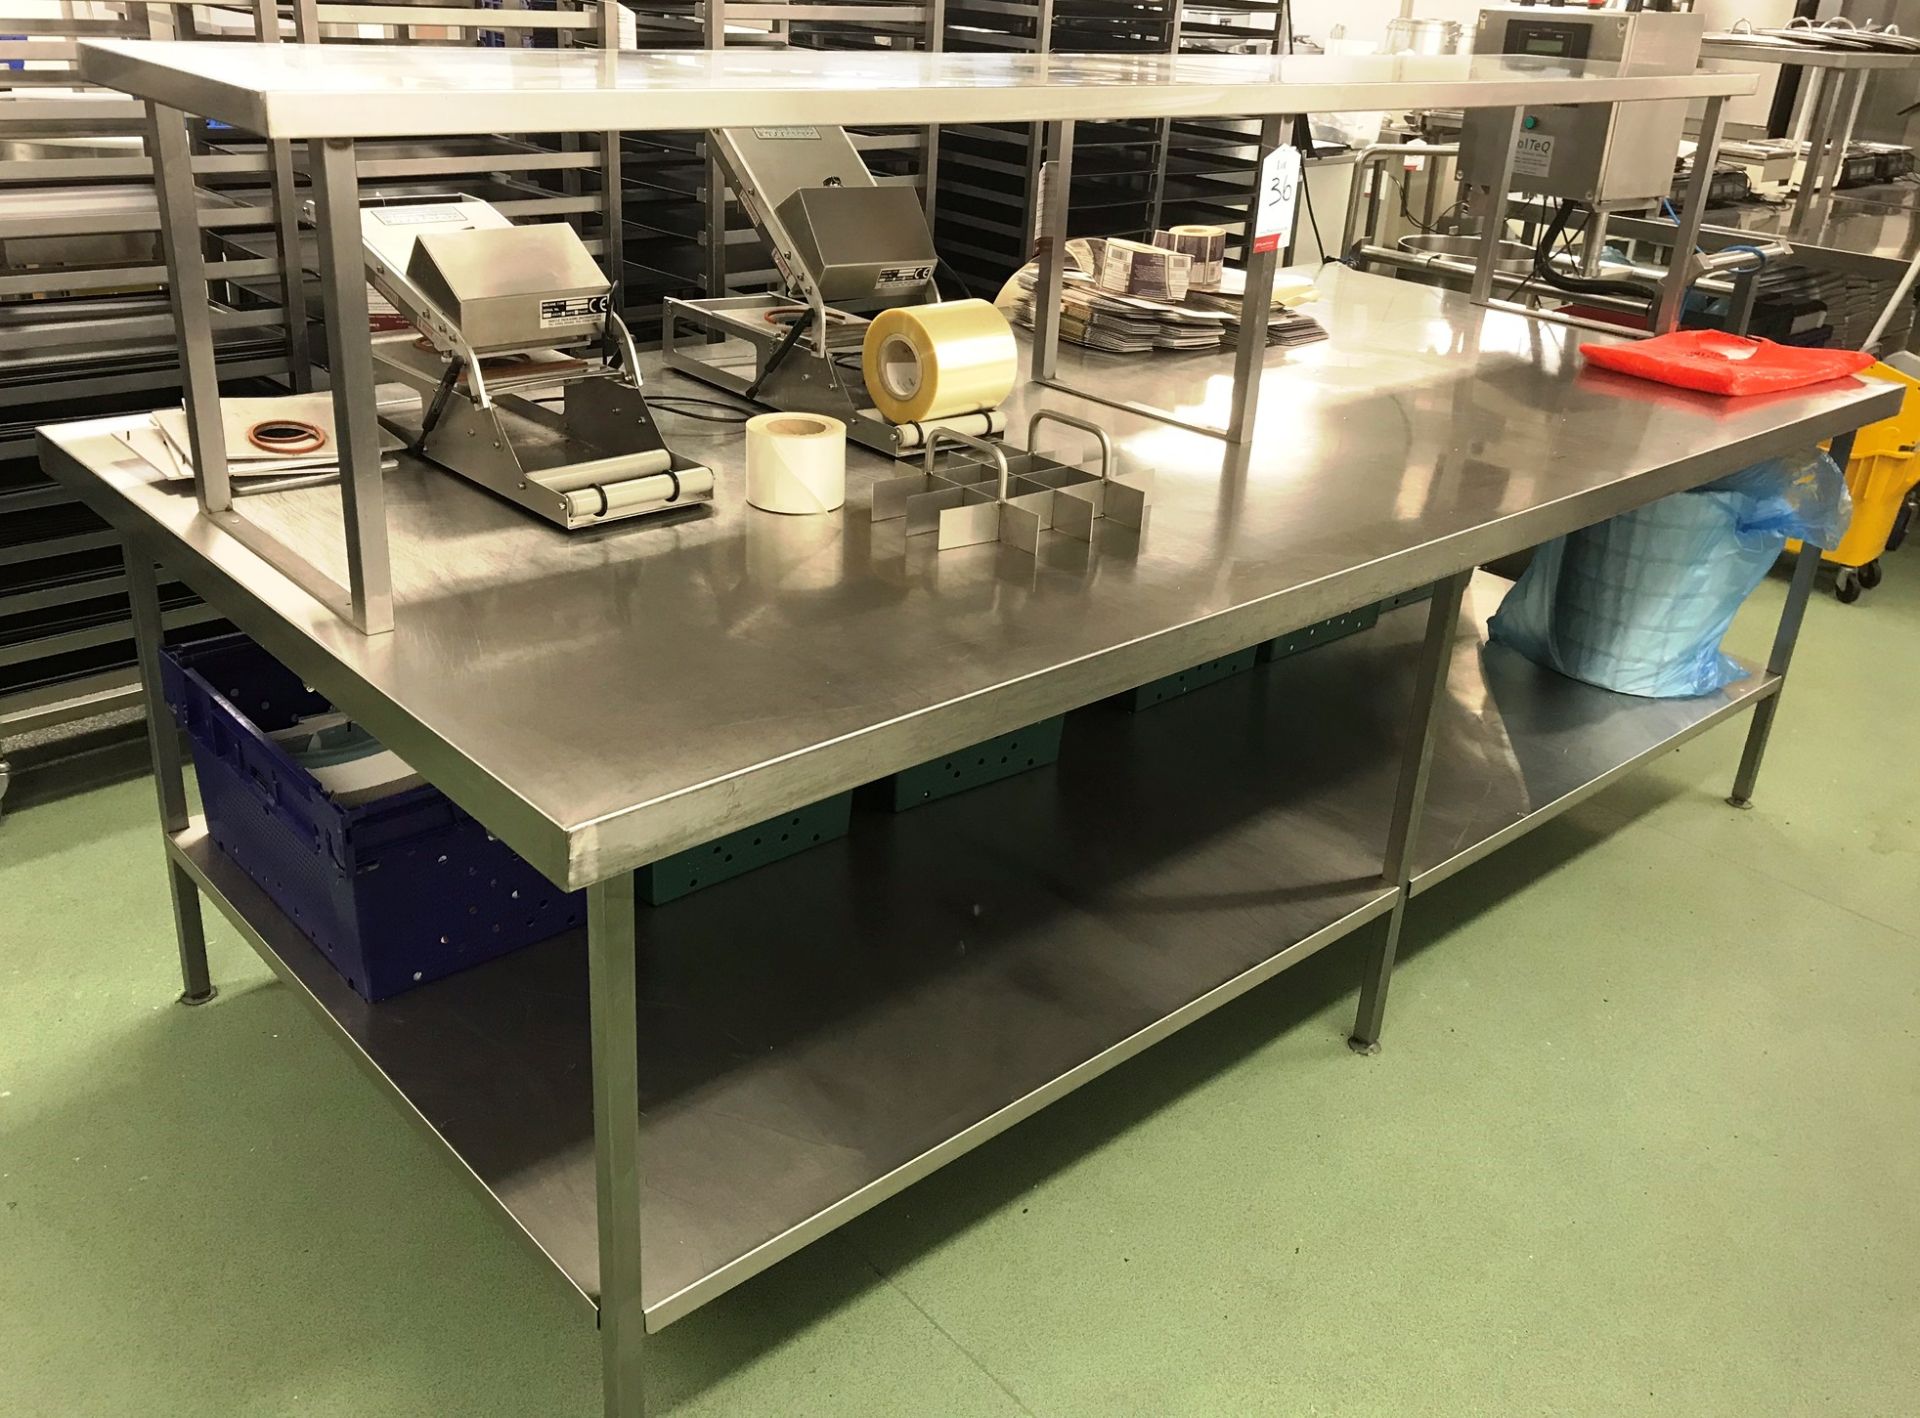 Stainless Steel Preparation Table w/ Gantry & Undershelf - 2850mm Length | CONTENTS NOT INCLUDED